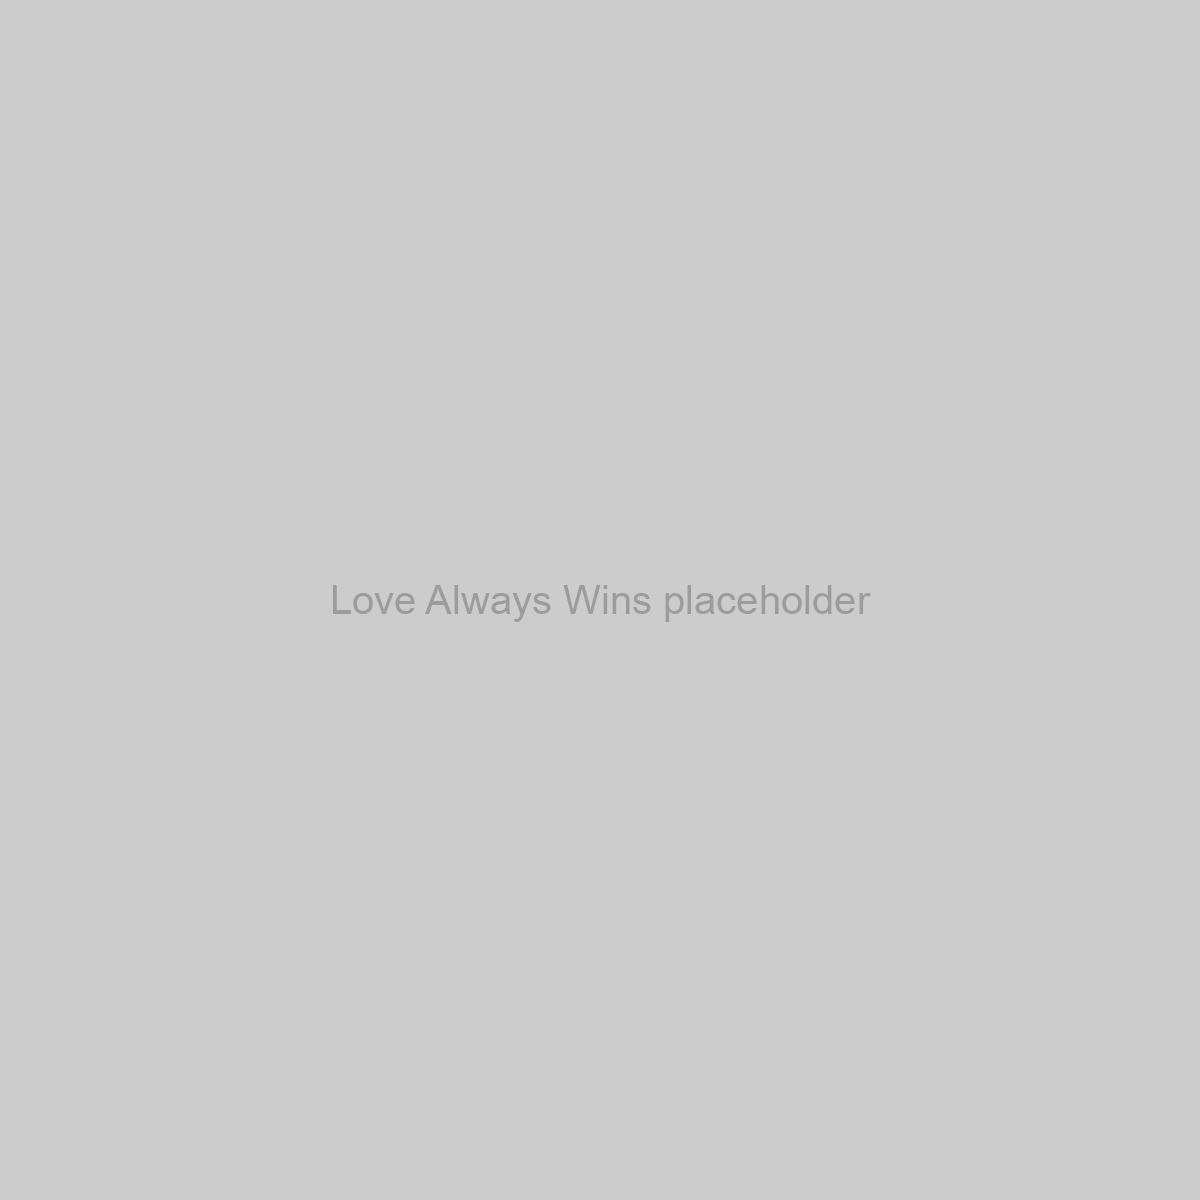 Love Always Wins Placeholder Image